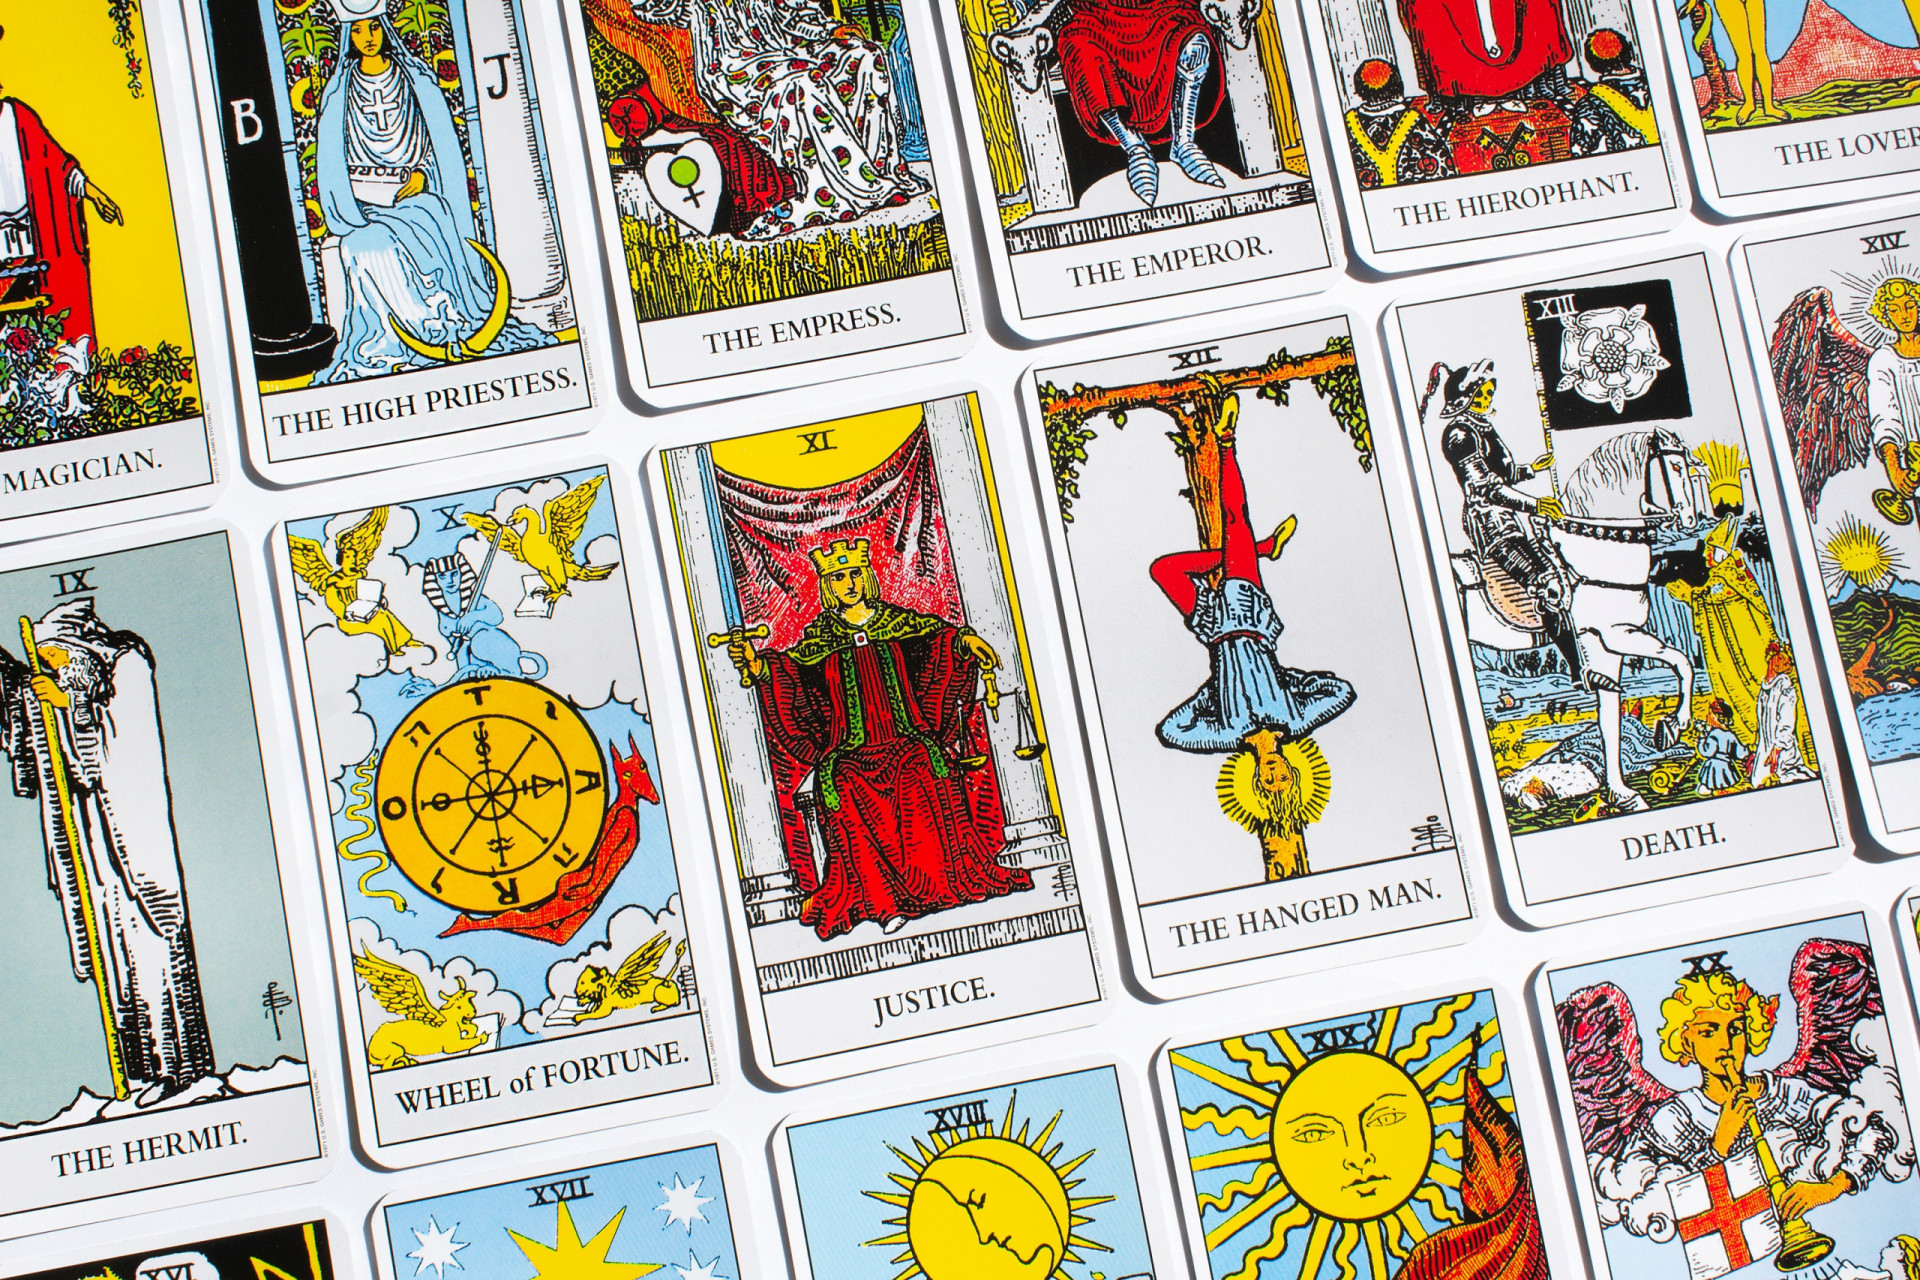 Is the use of tarot cards safe or sinister?